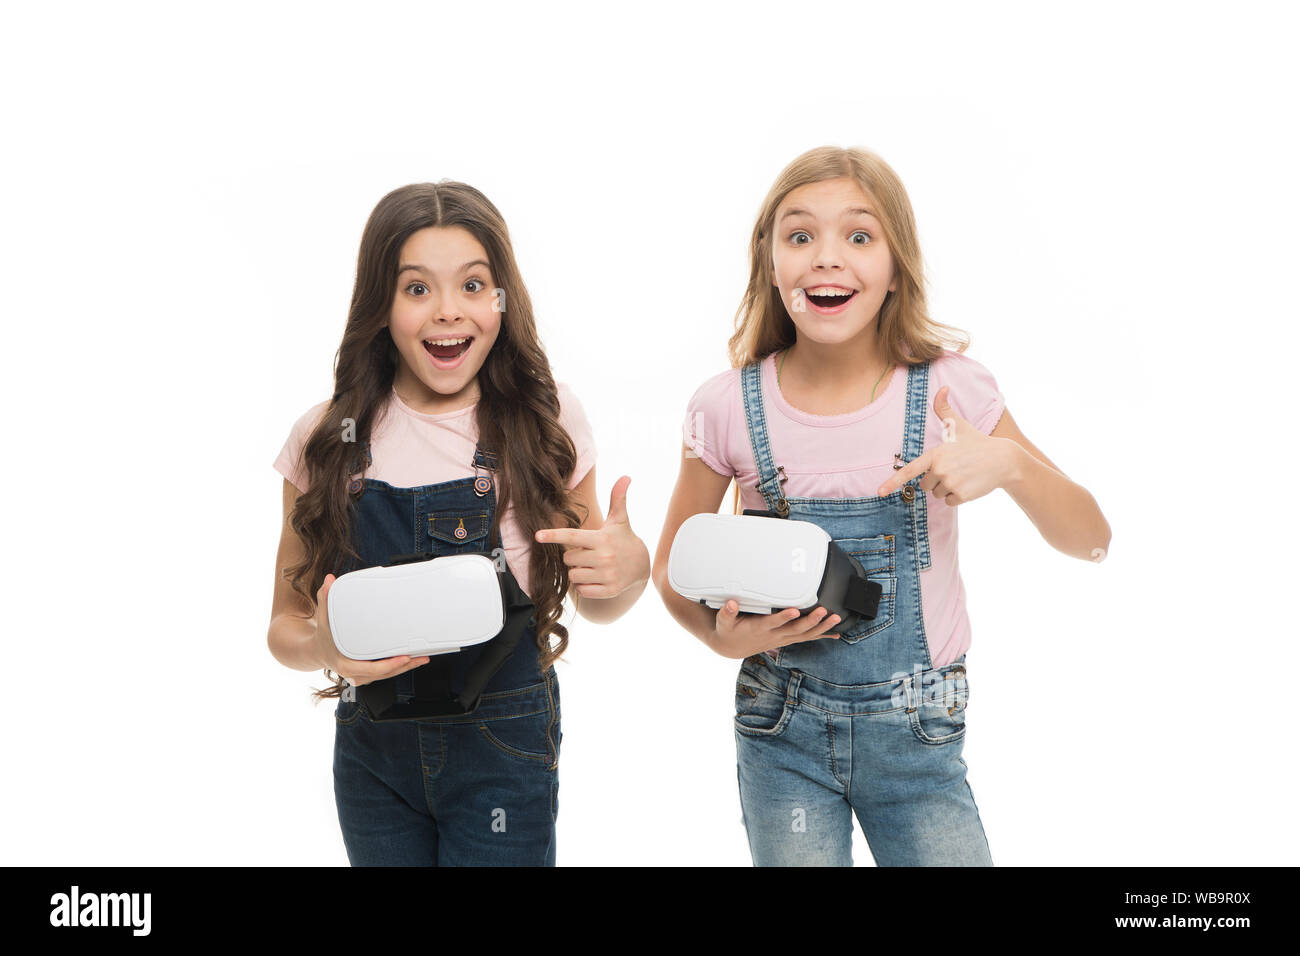 Cyber gaming. Augmented reality technology. Virtual reality is exciting. Girls little kids wear vr glasses white background. Virtual education concept. Modern life. Interaction in virtual space. Stock Photo